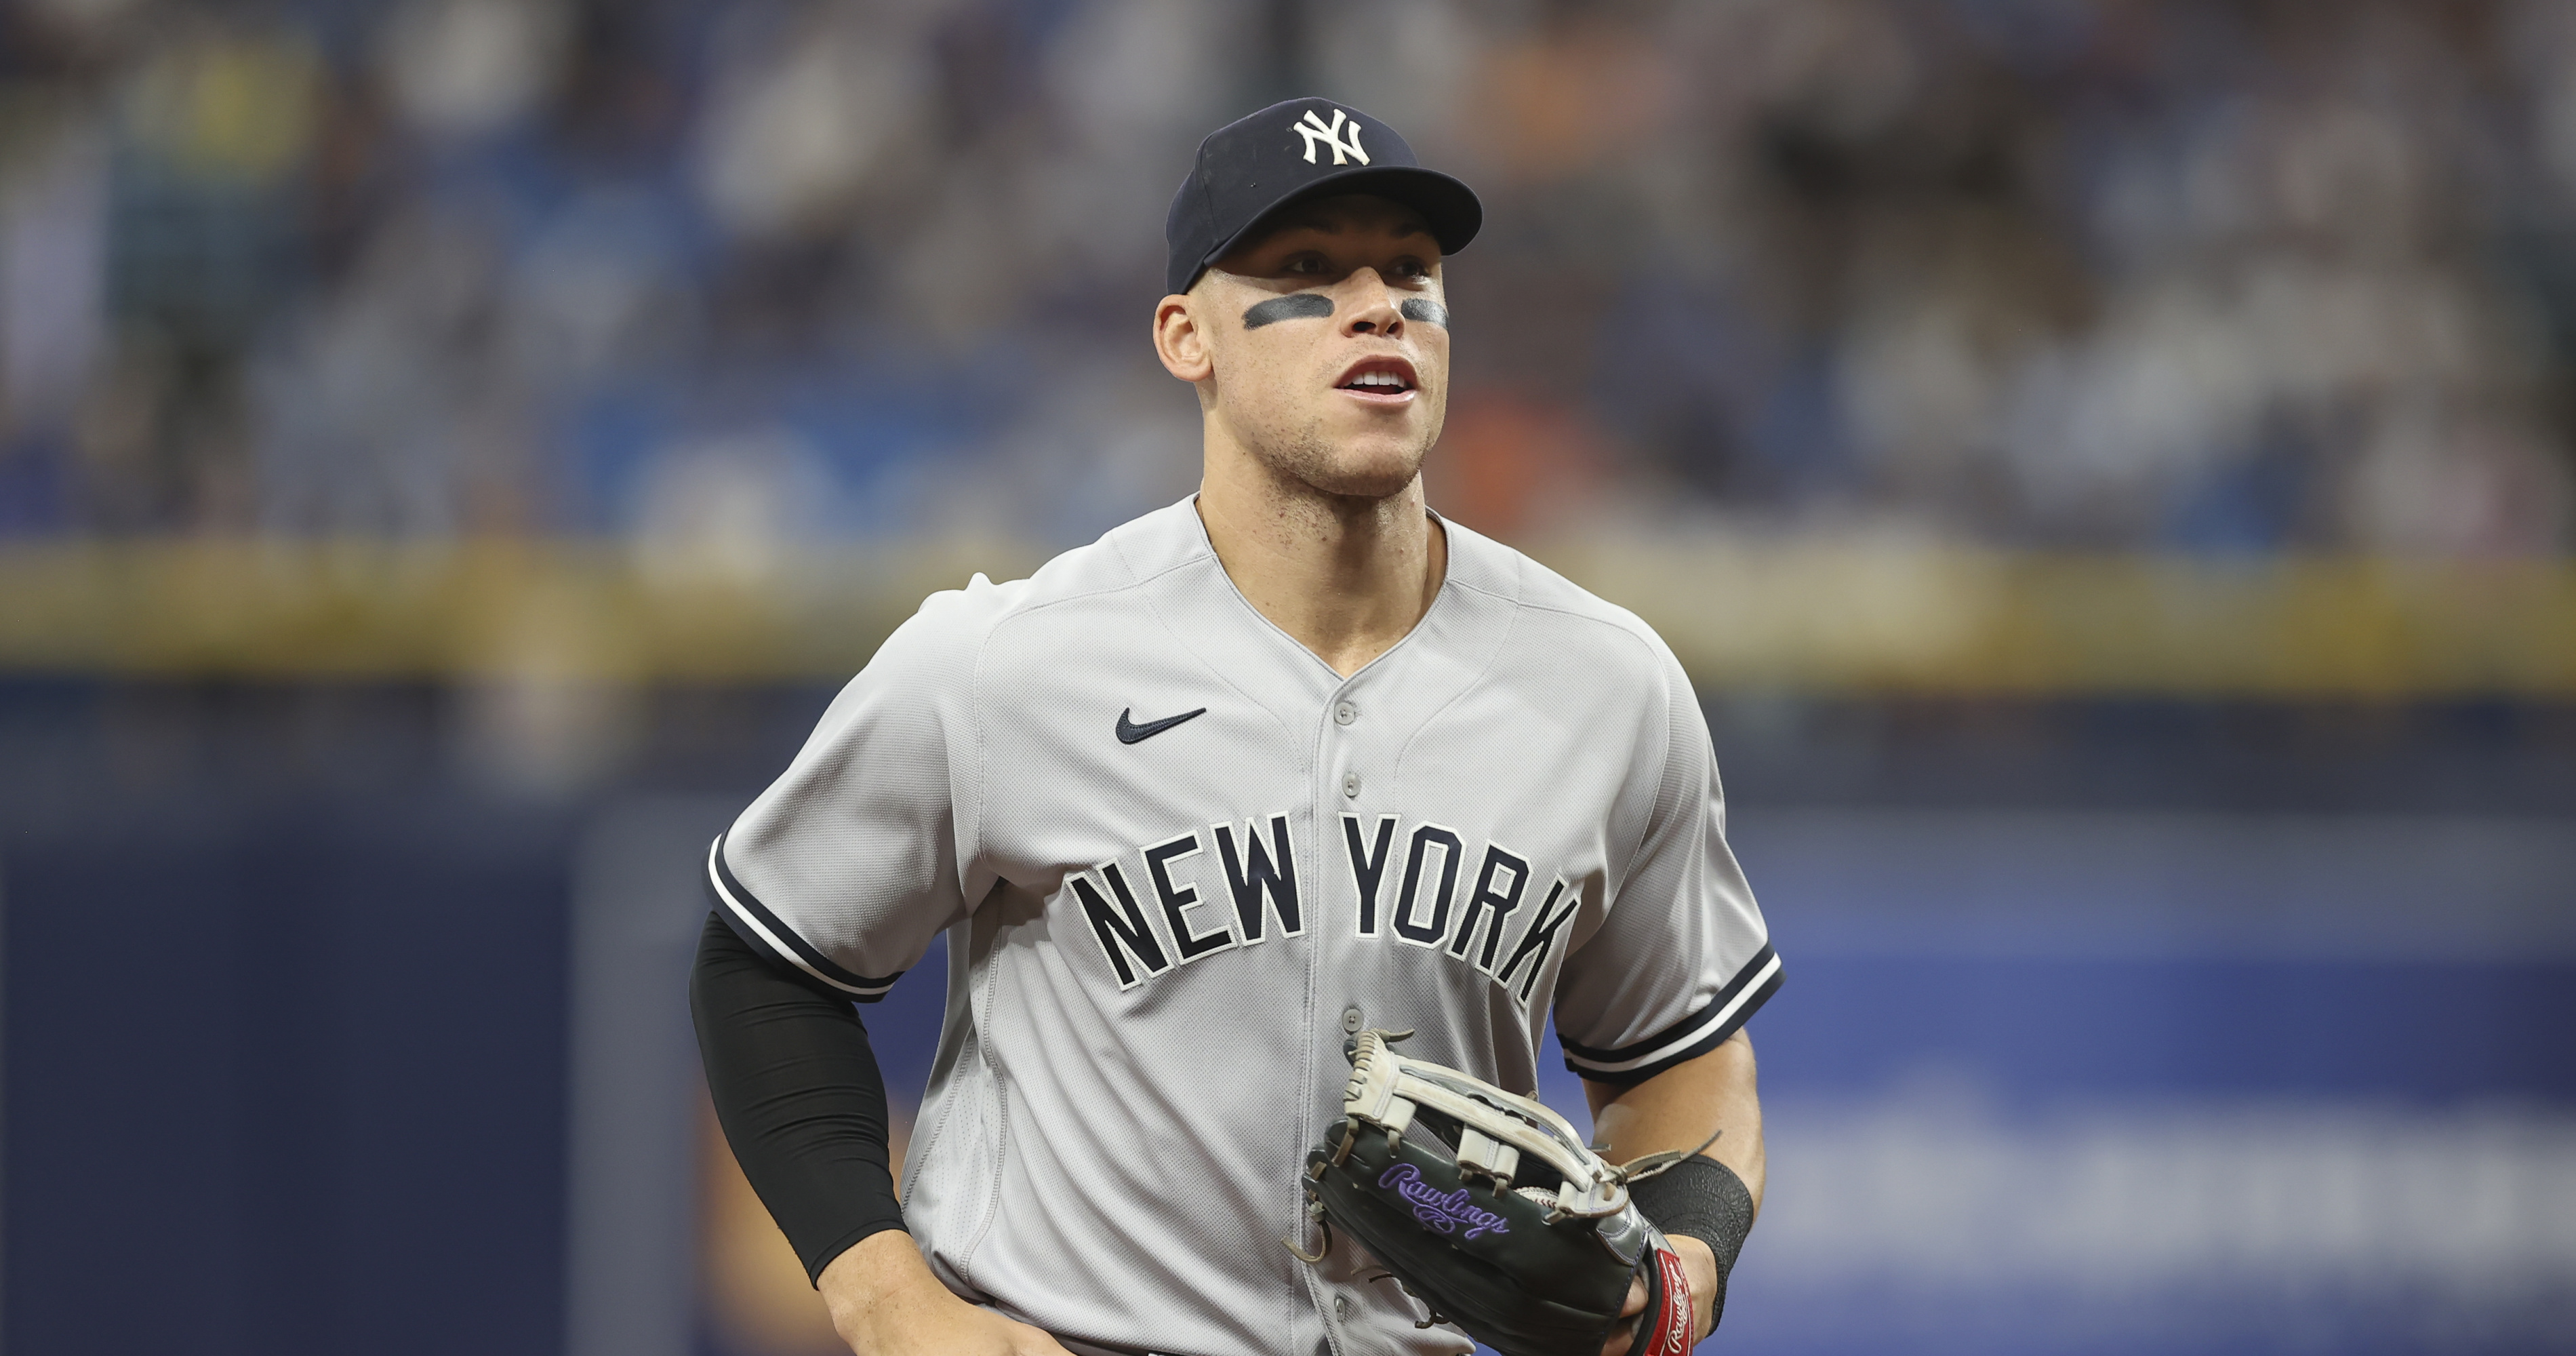 A-Rod revisited: Do big money MLB contracts pay off? - Global